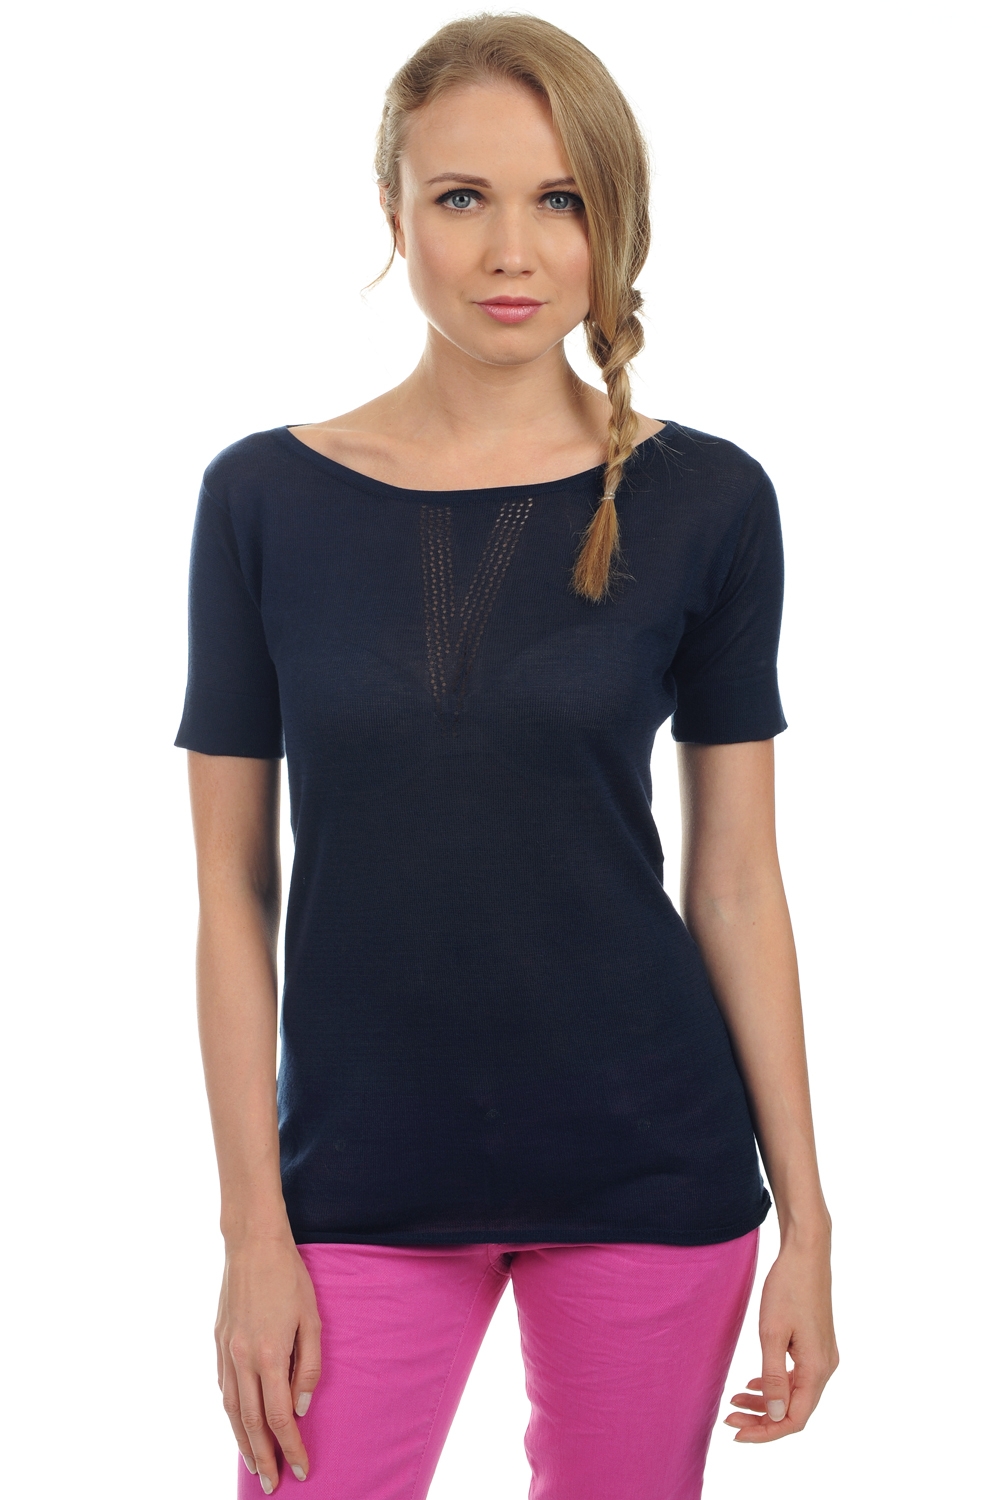 Cotton Giza 45 ladies spring summer collection whitney navy s